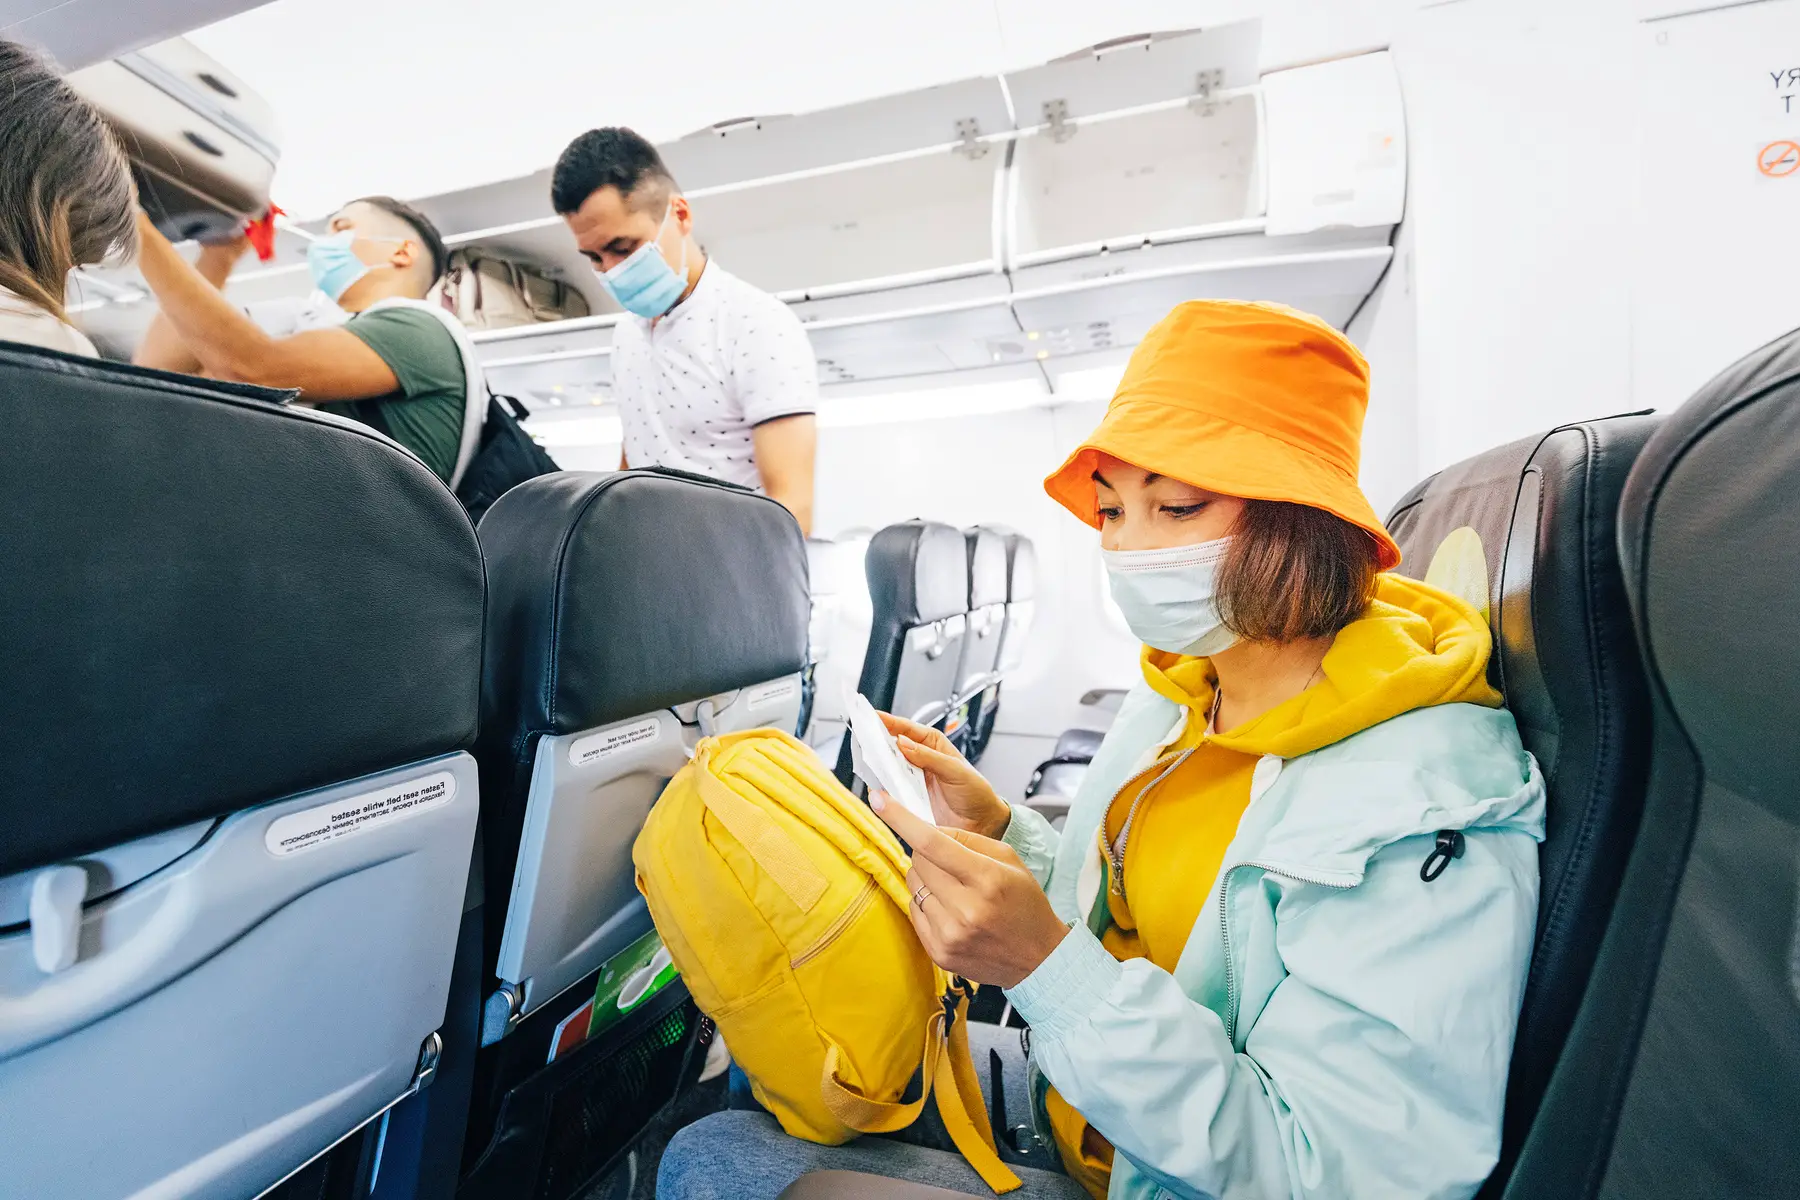 Airplane passengers wearing masks in Moscow during COVID-19 pandemic